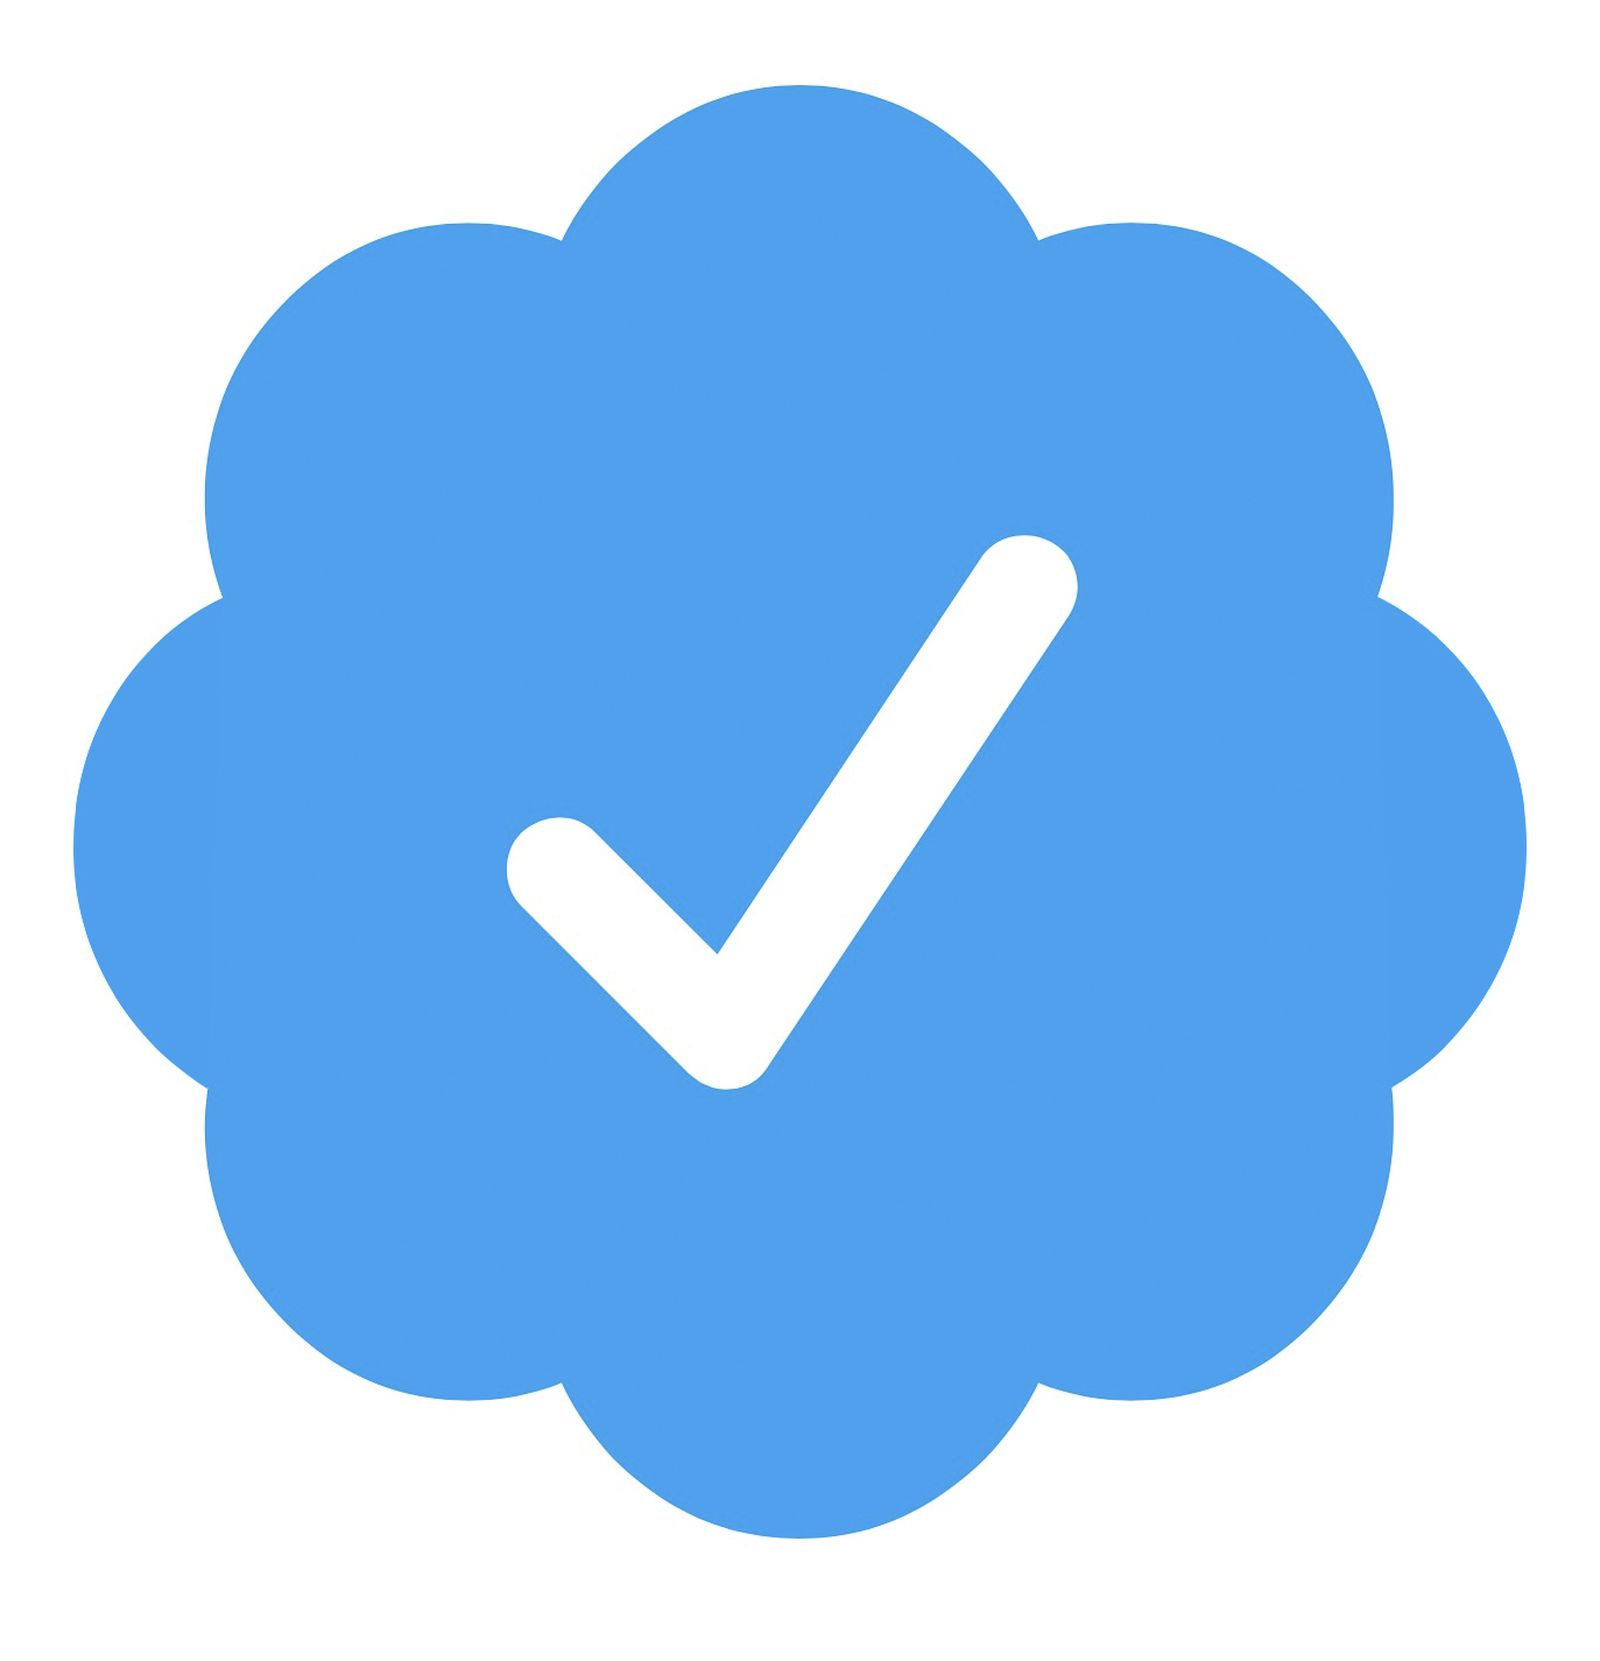 Twitter Says Account Verification to Return in Early 2021 - MacRumors